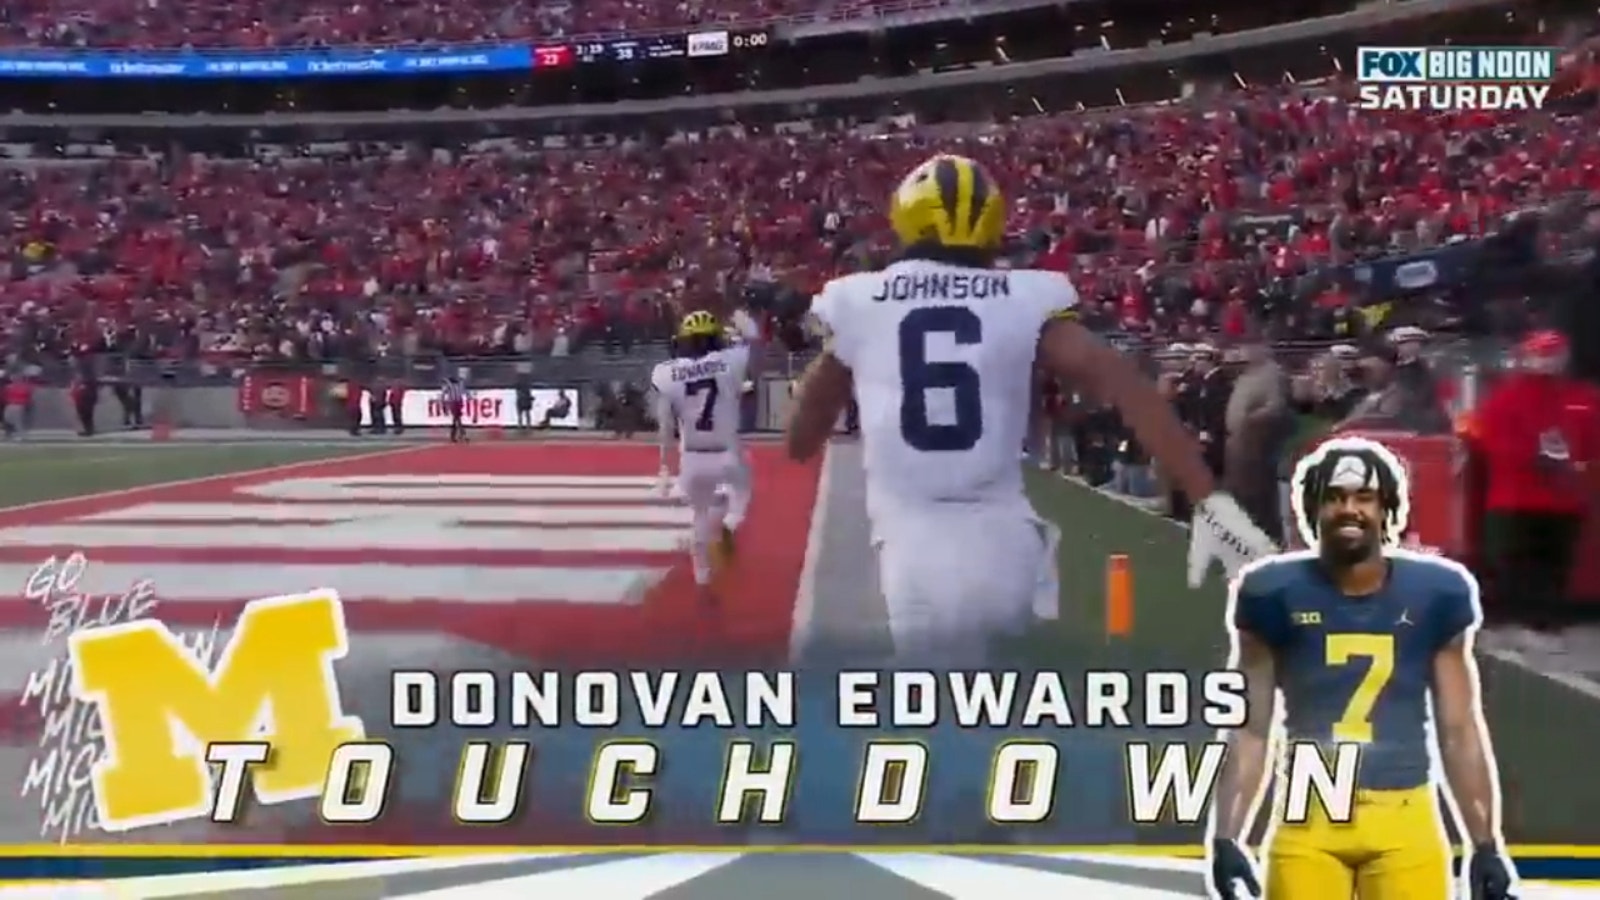 Donovan Edwards' 85-yard touchdown clinches the win for Michigan